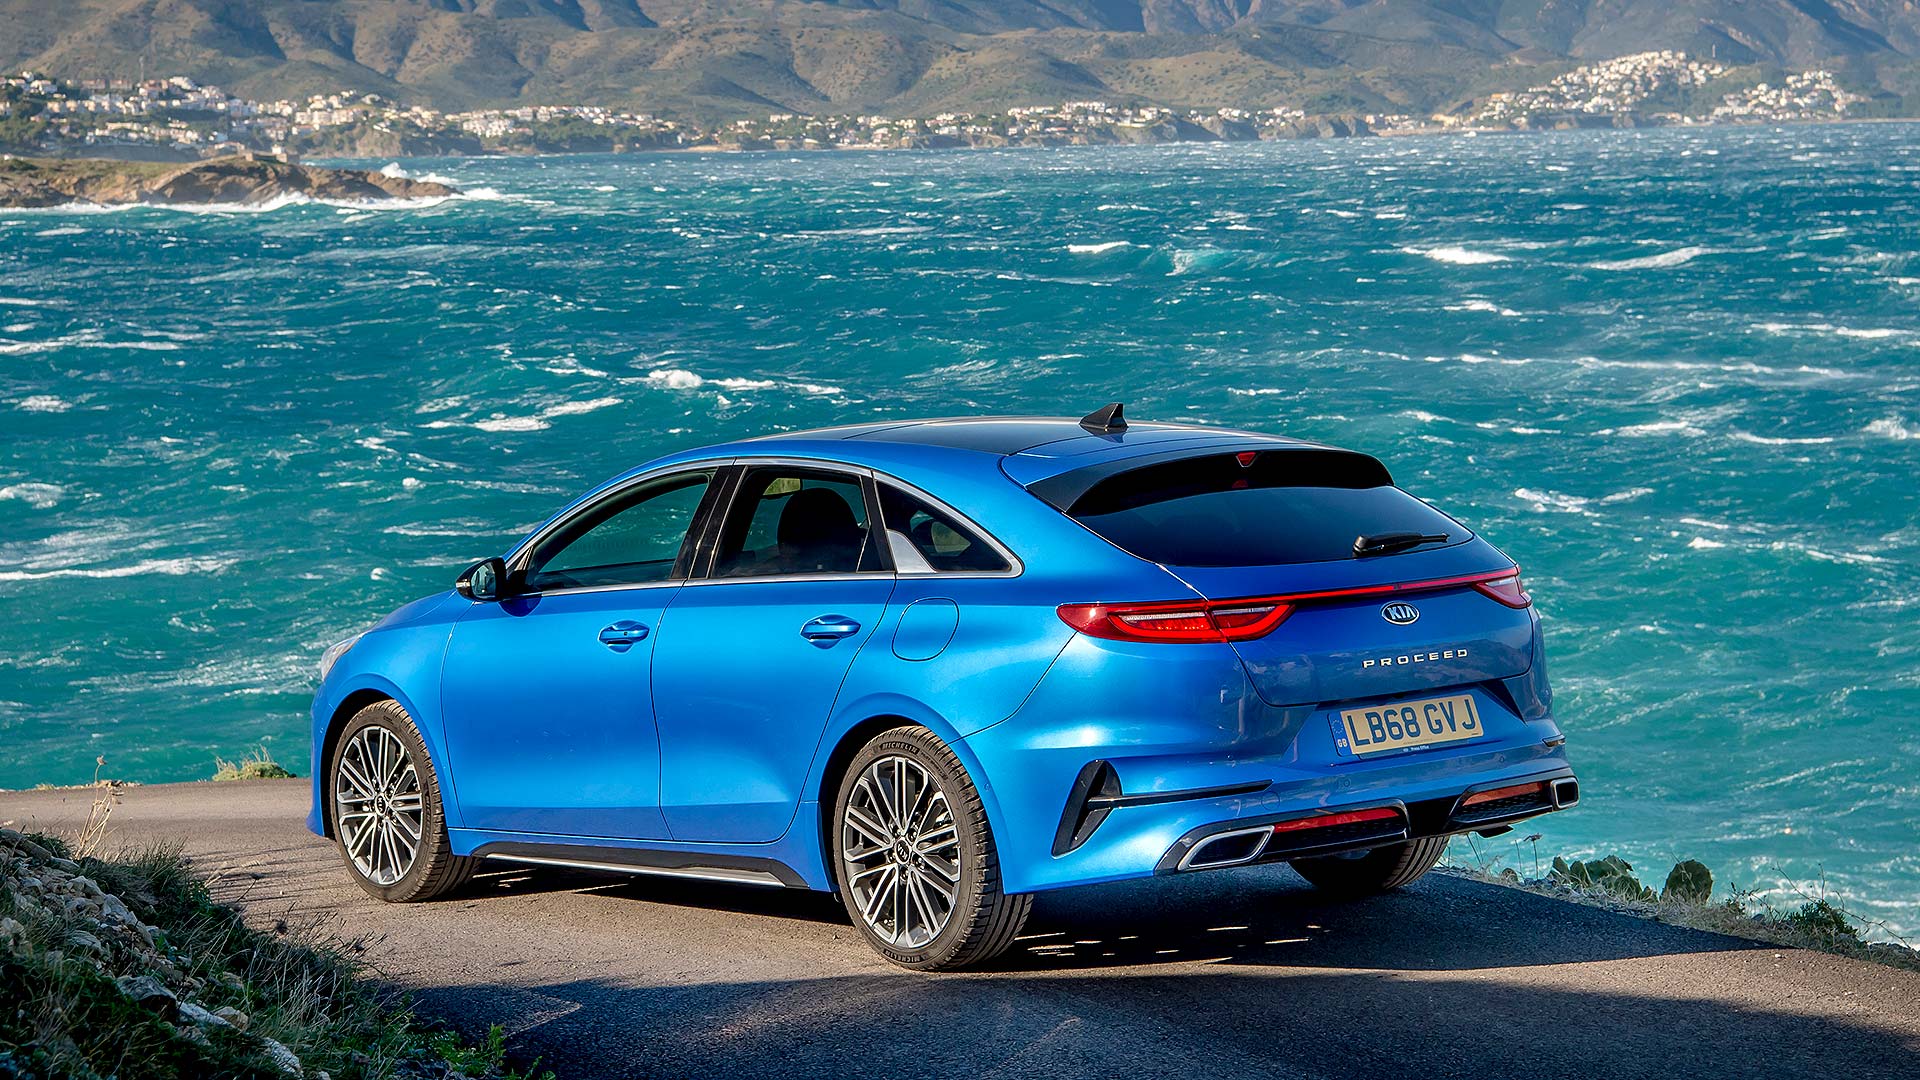 19 Kia Proceed Review The Shooting Brake You Can Afford